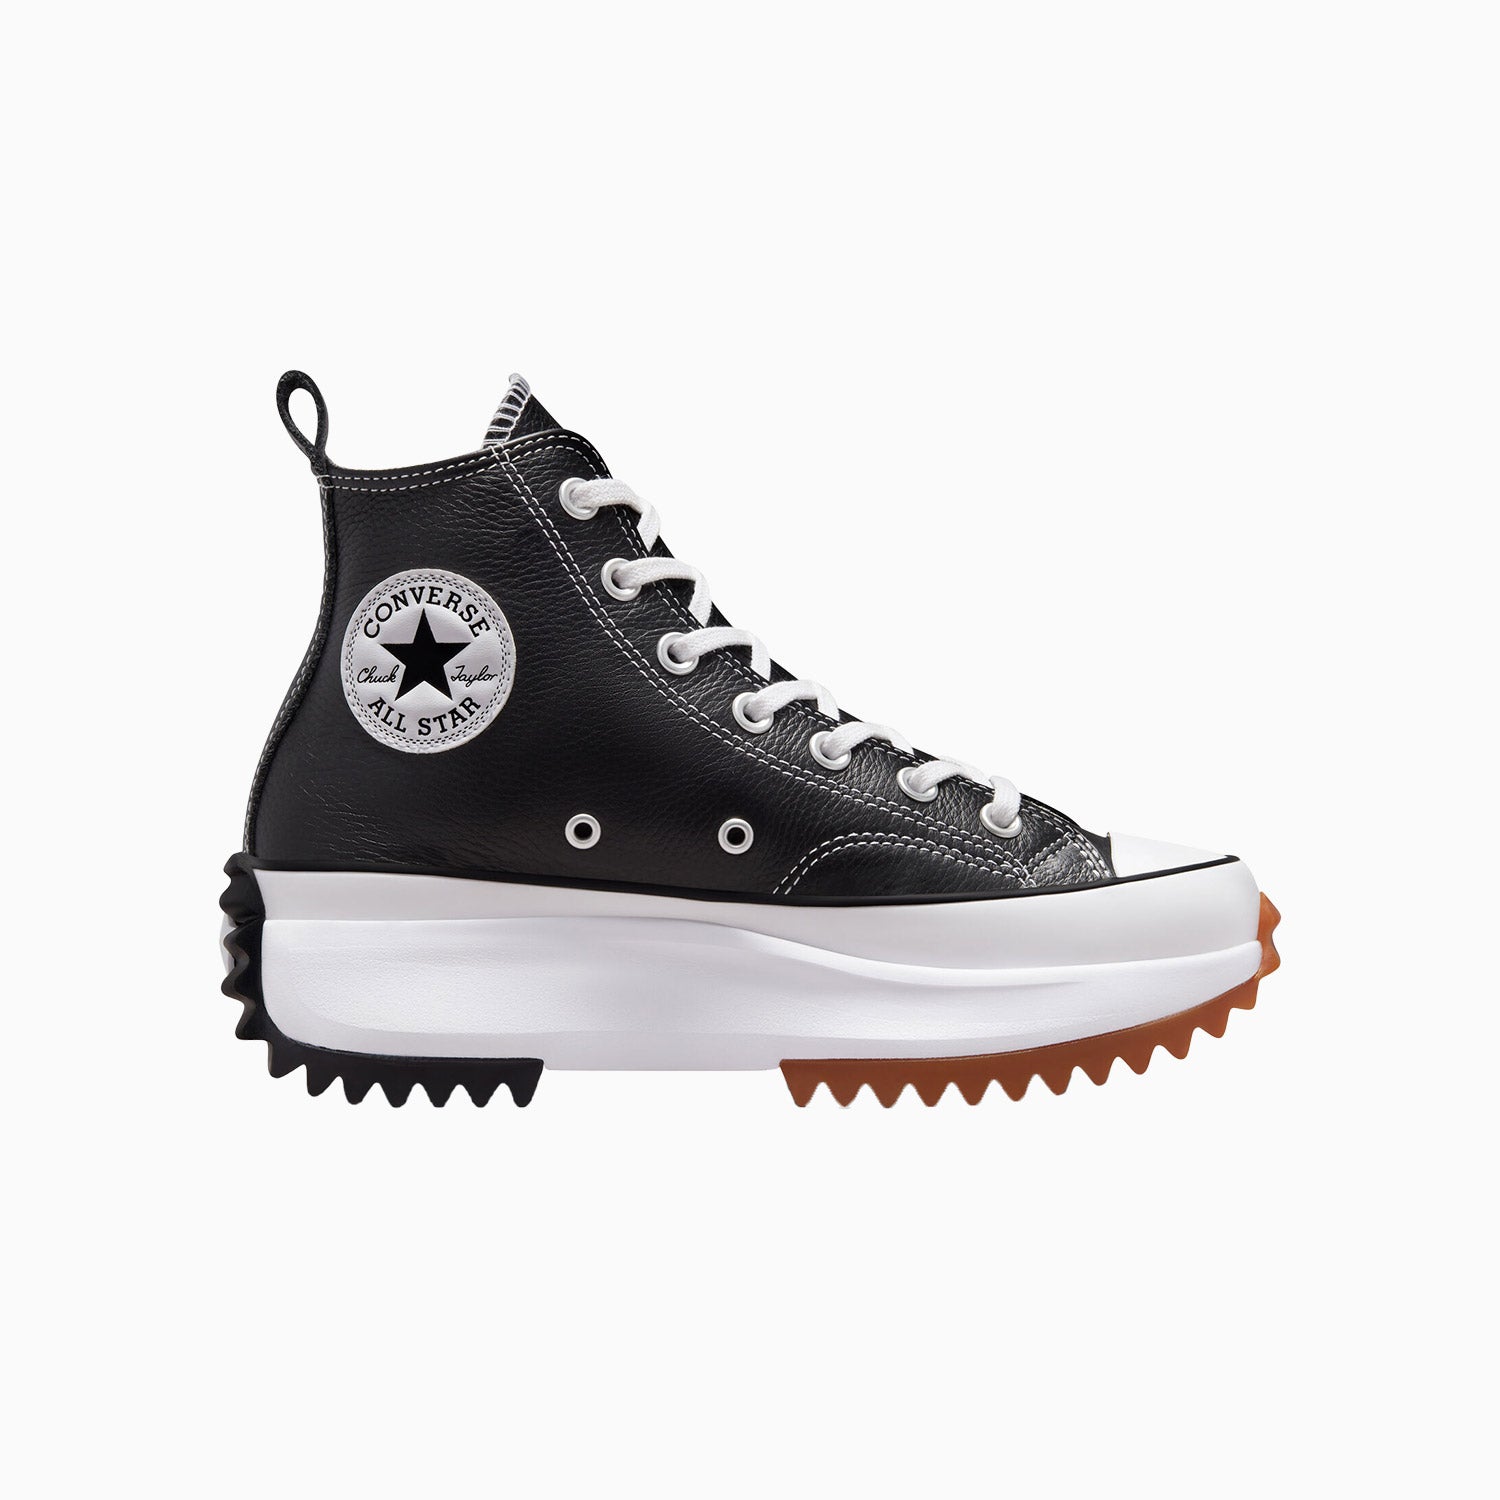 converse-run-star-hike-platform-foundational-leather-shoes-a04292c